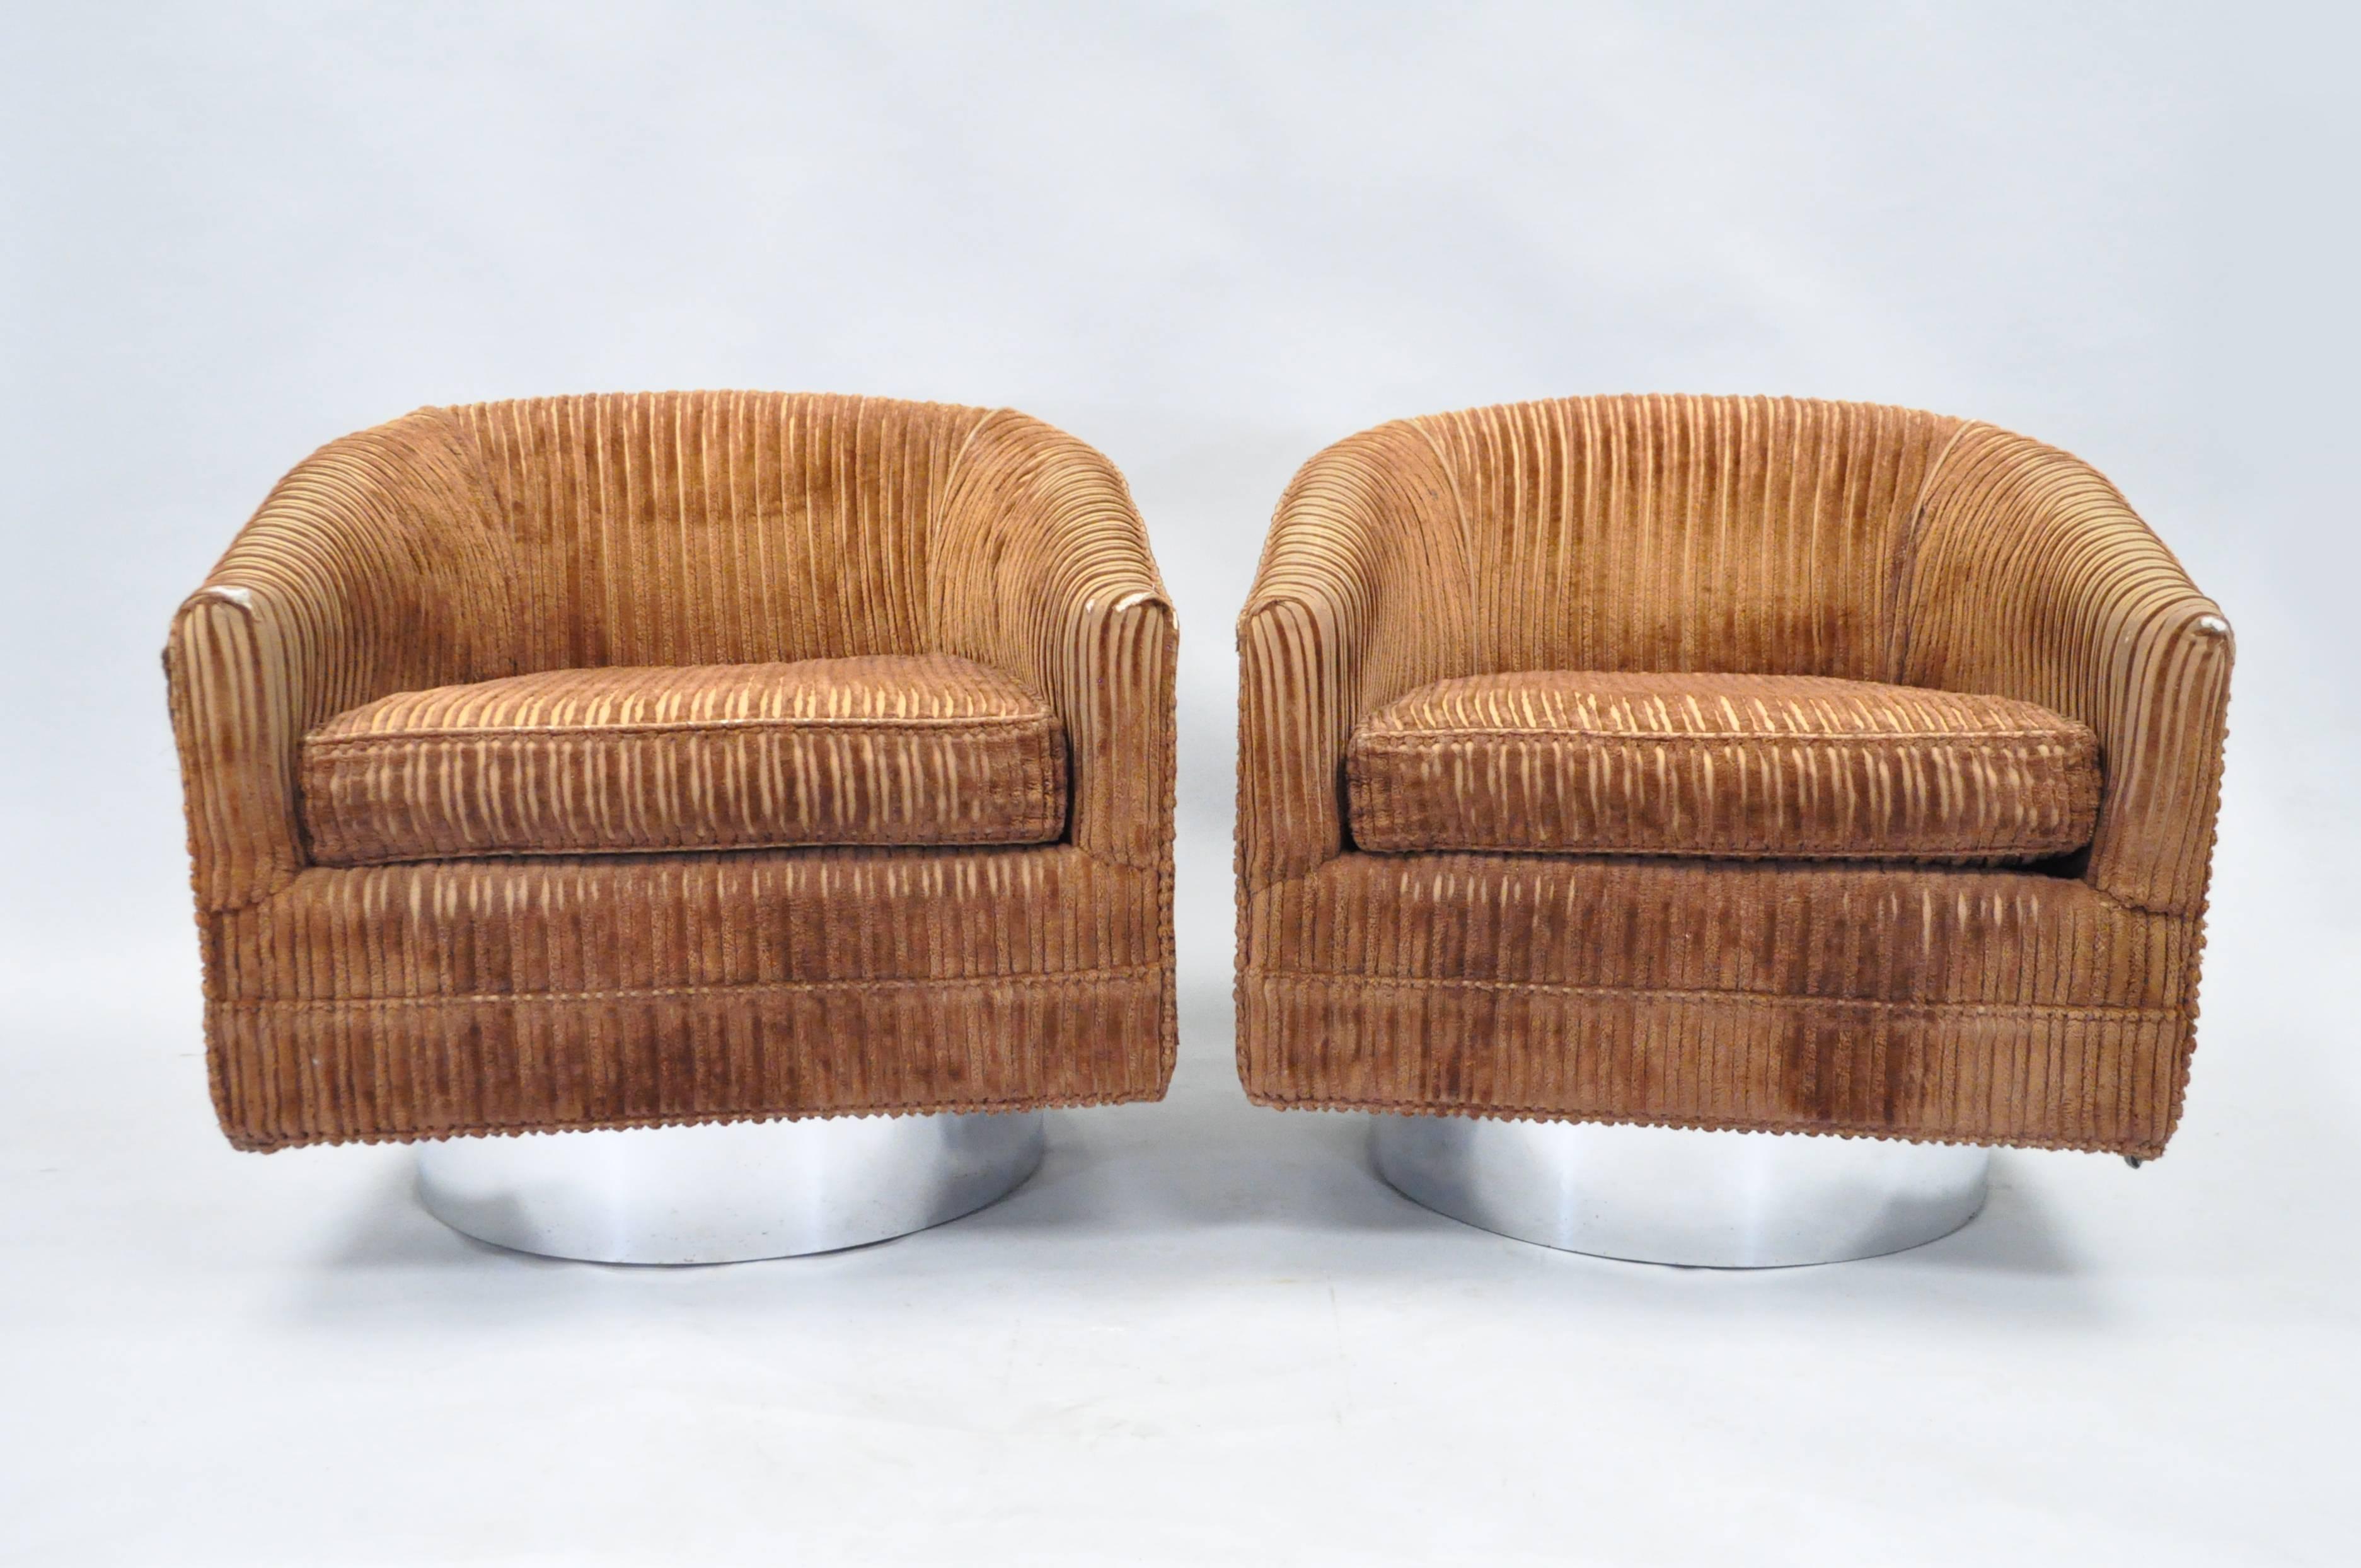 Pair of vintage Mid-Century Modern chrome base swivel club chairs attributed to Milo Baughman for Thayer Coggin. This original pair of lounge chairs features clean modern lines, barrel backs with the uppers raised on swiveling chrome trimmed plinths.